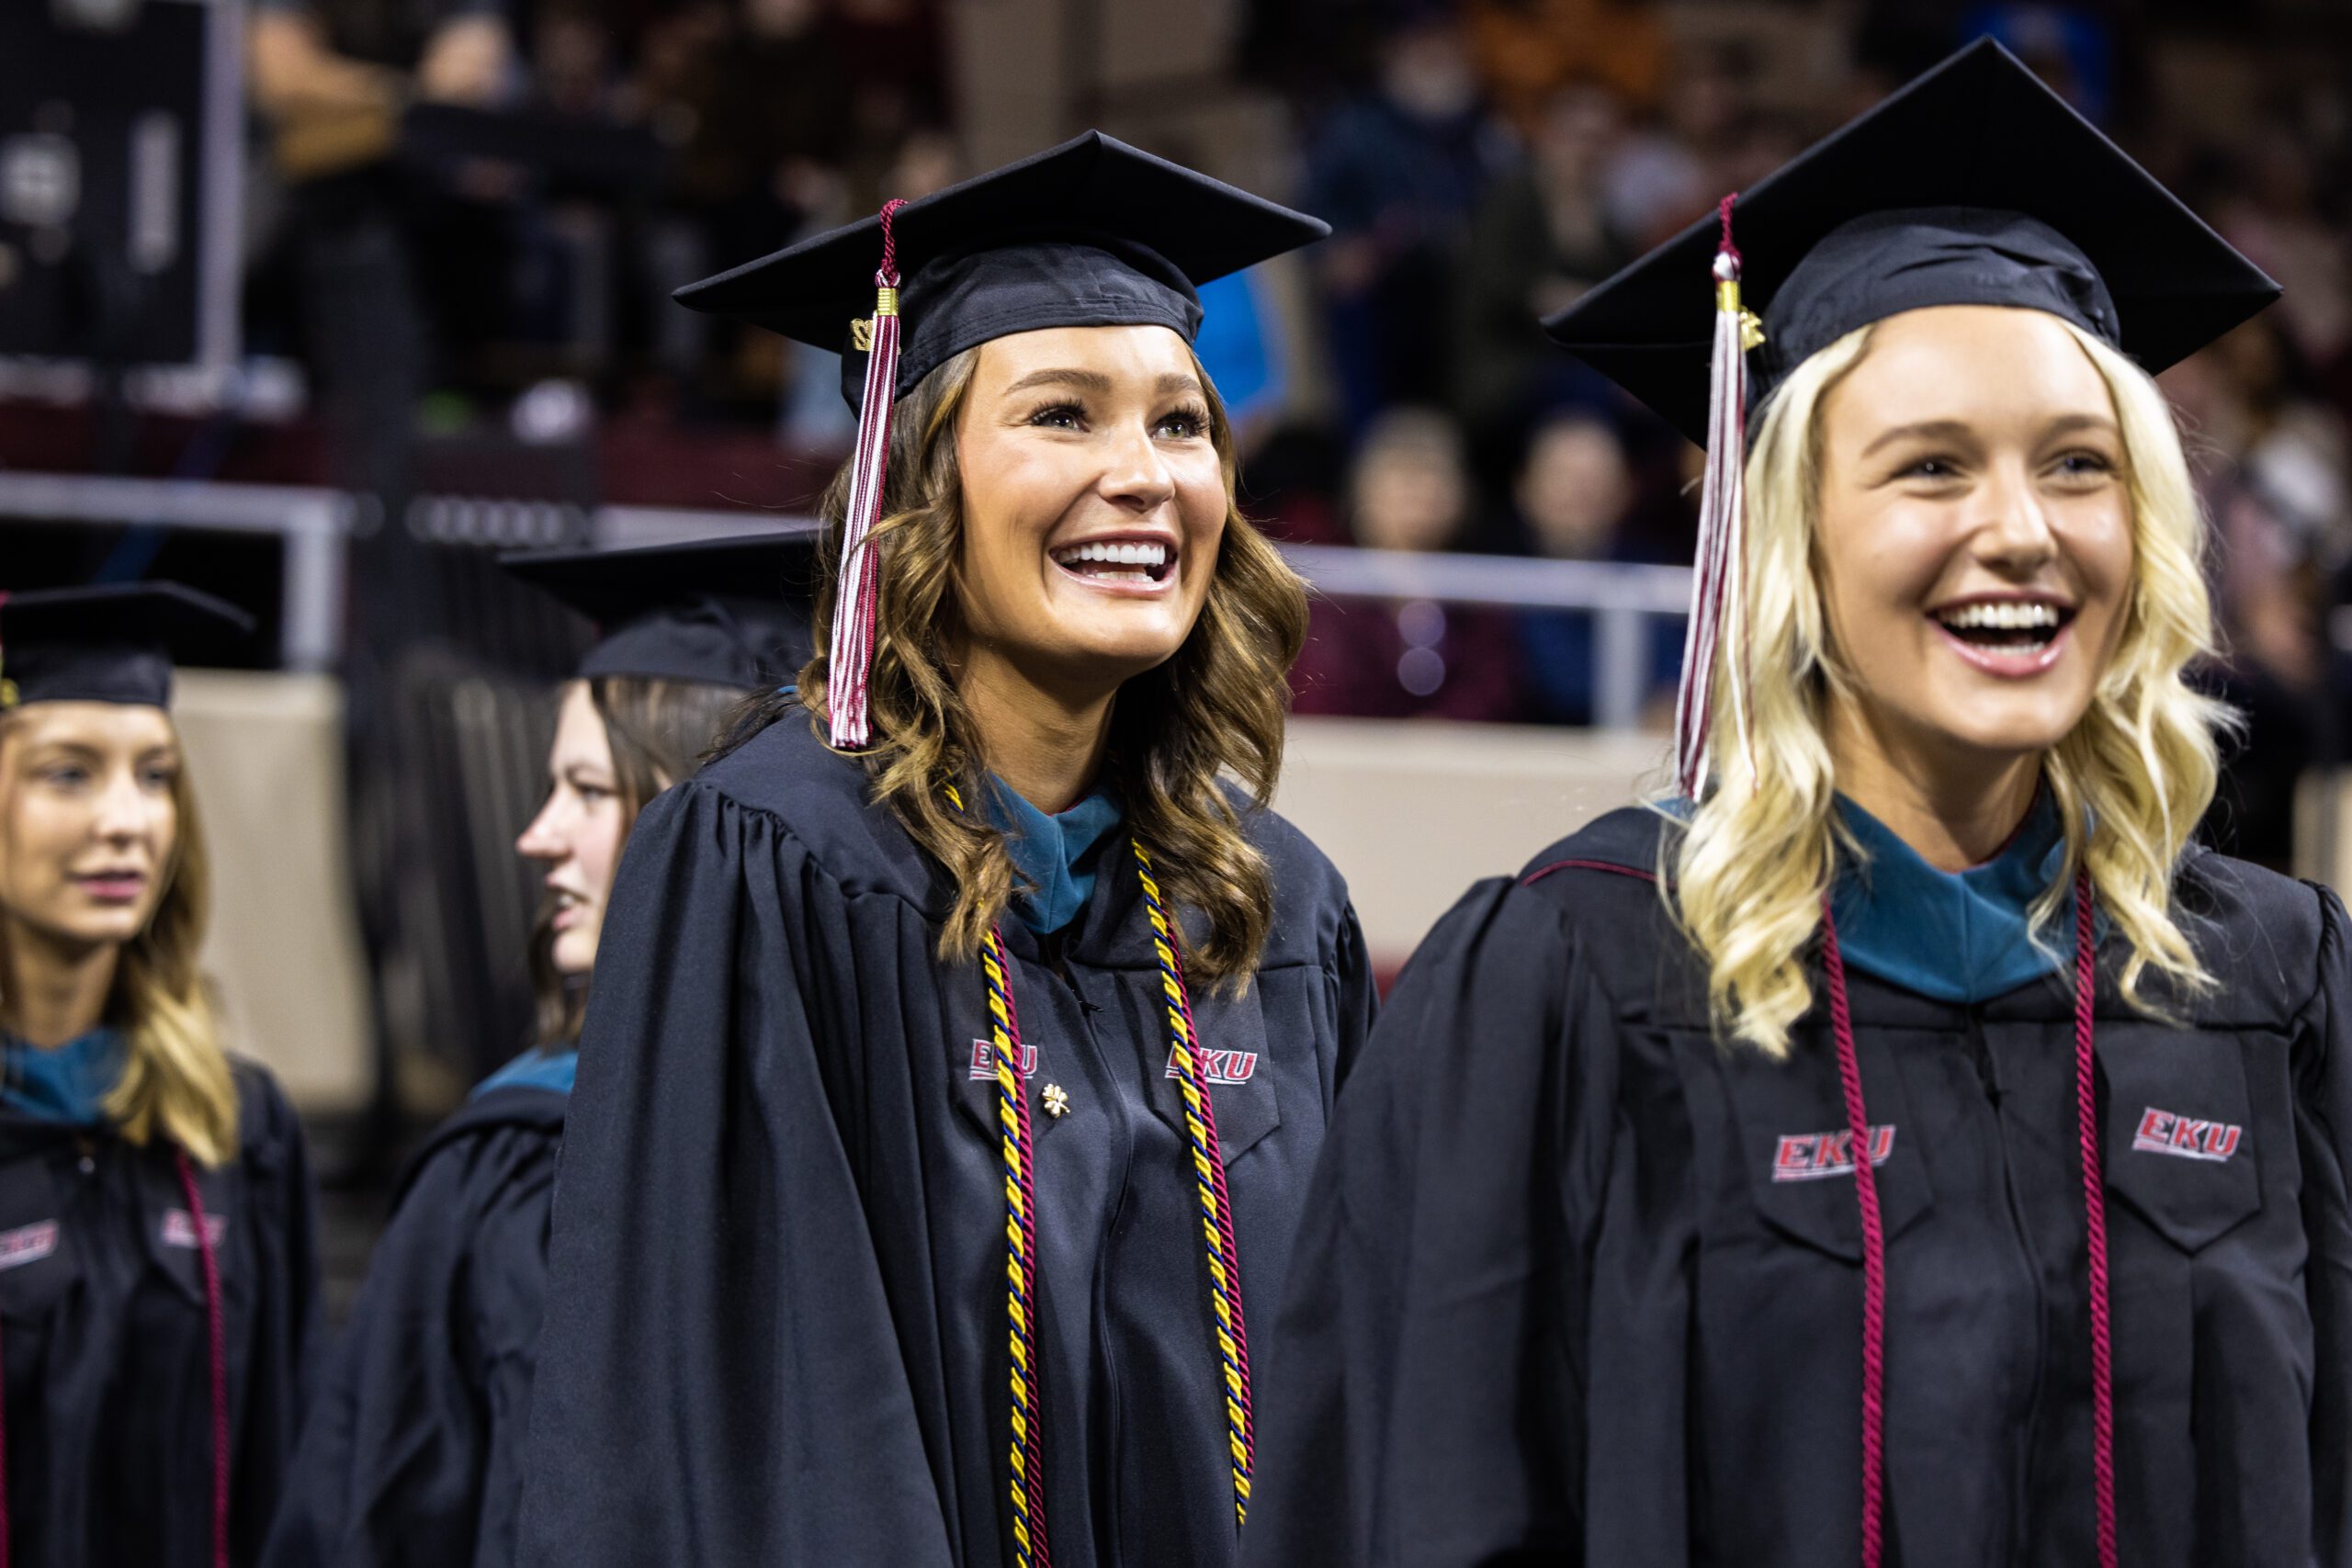 Graduating nursing students wearing cap and gown smile at commencement ceremony